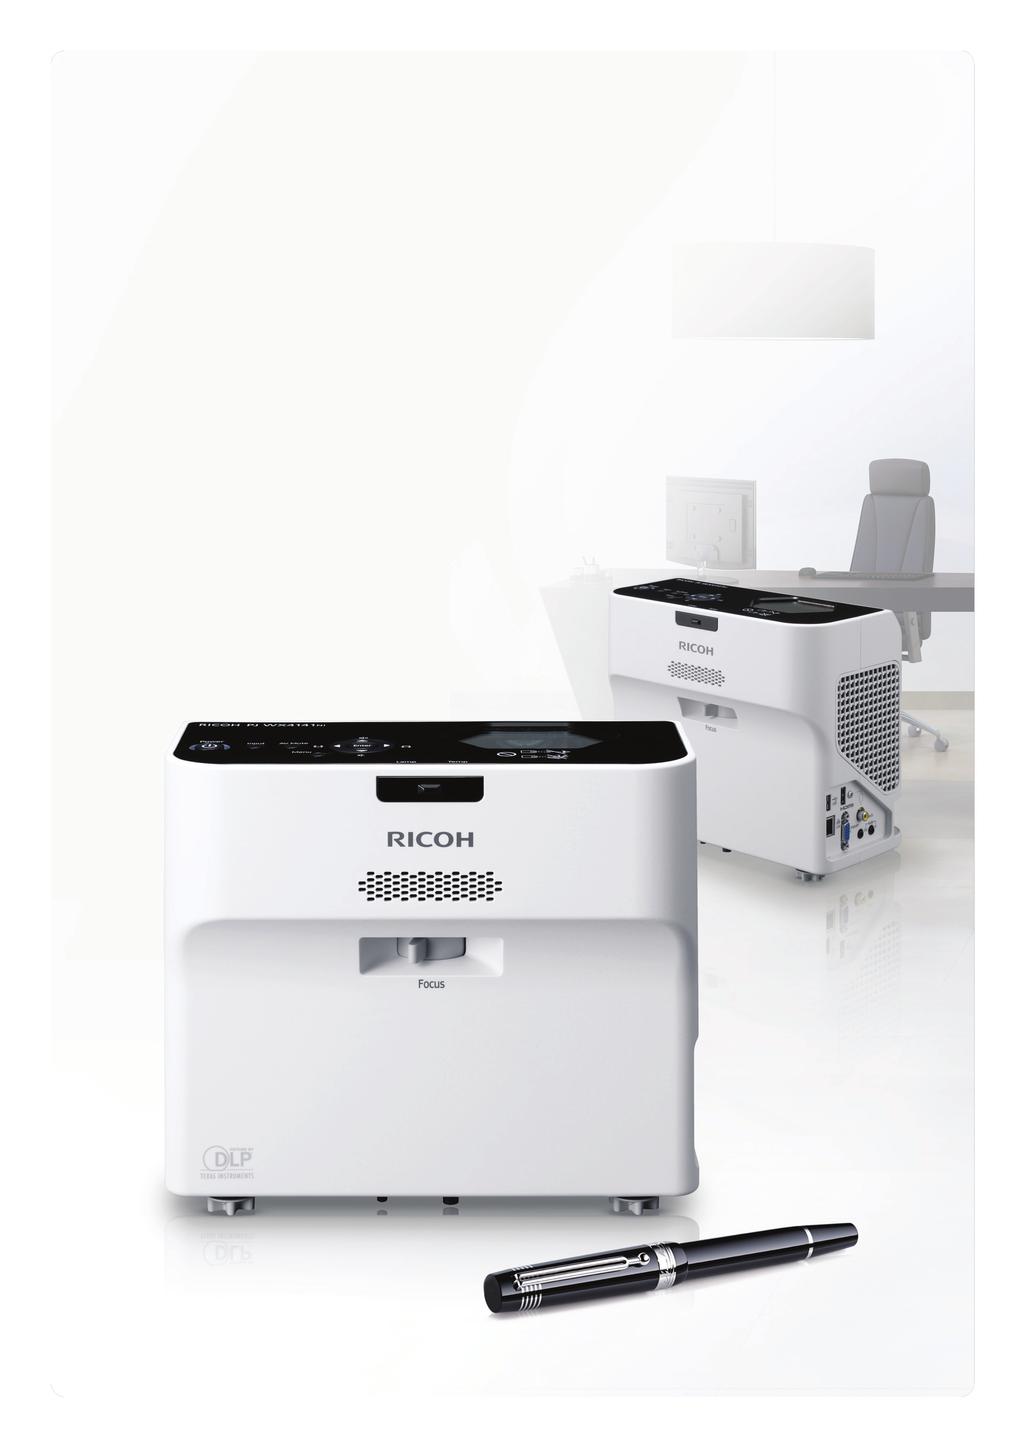 Share information any time, anywhere RICOH PJ WX4141N series projector offer all the flexibility and versatility demanded by today s agile businesses.